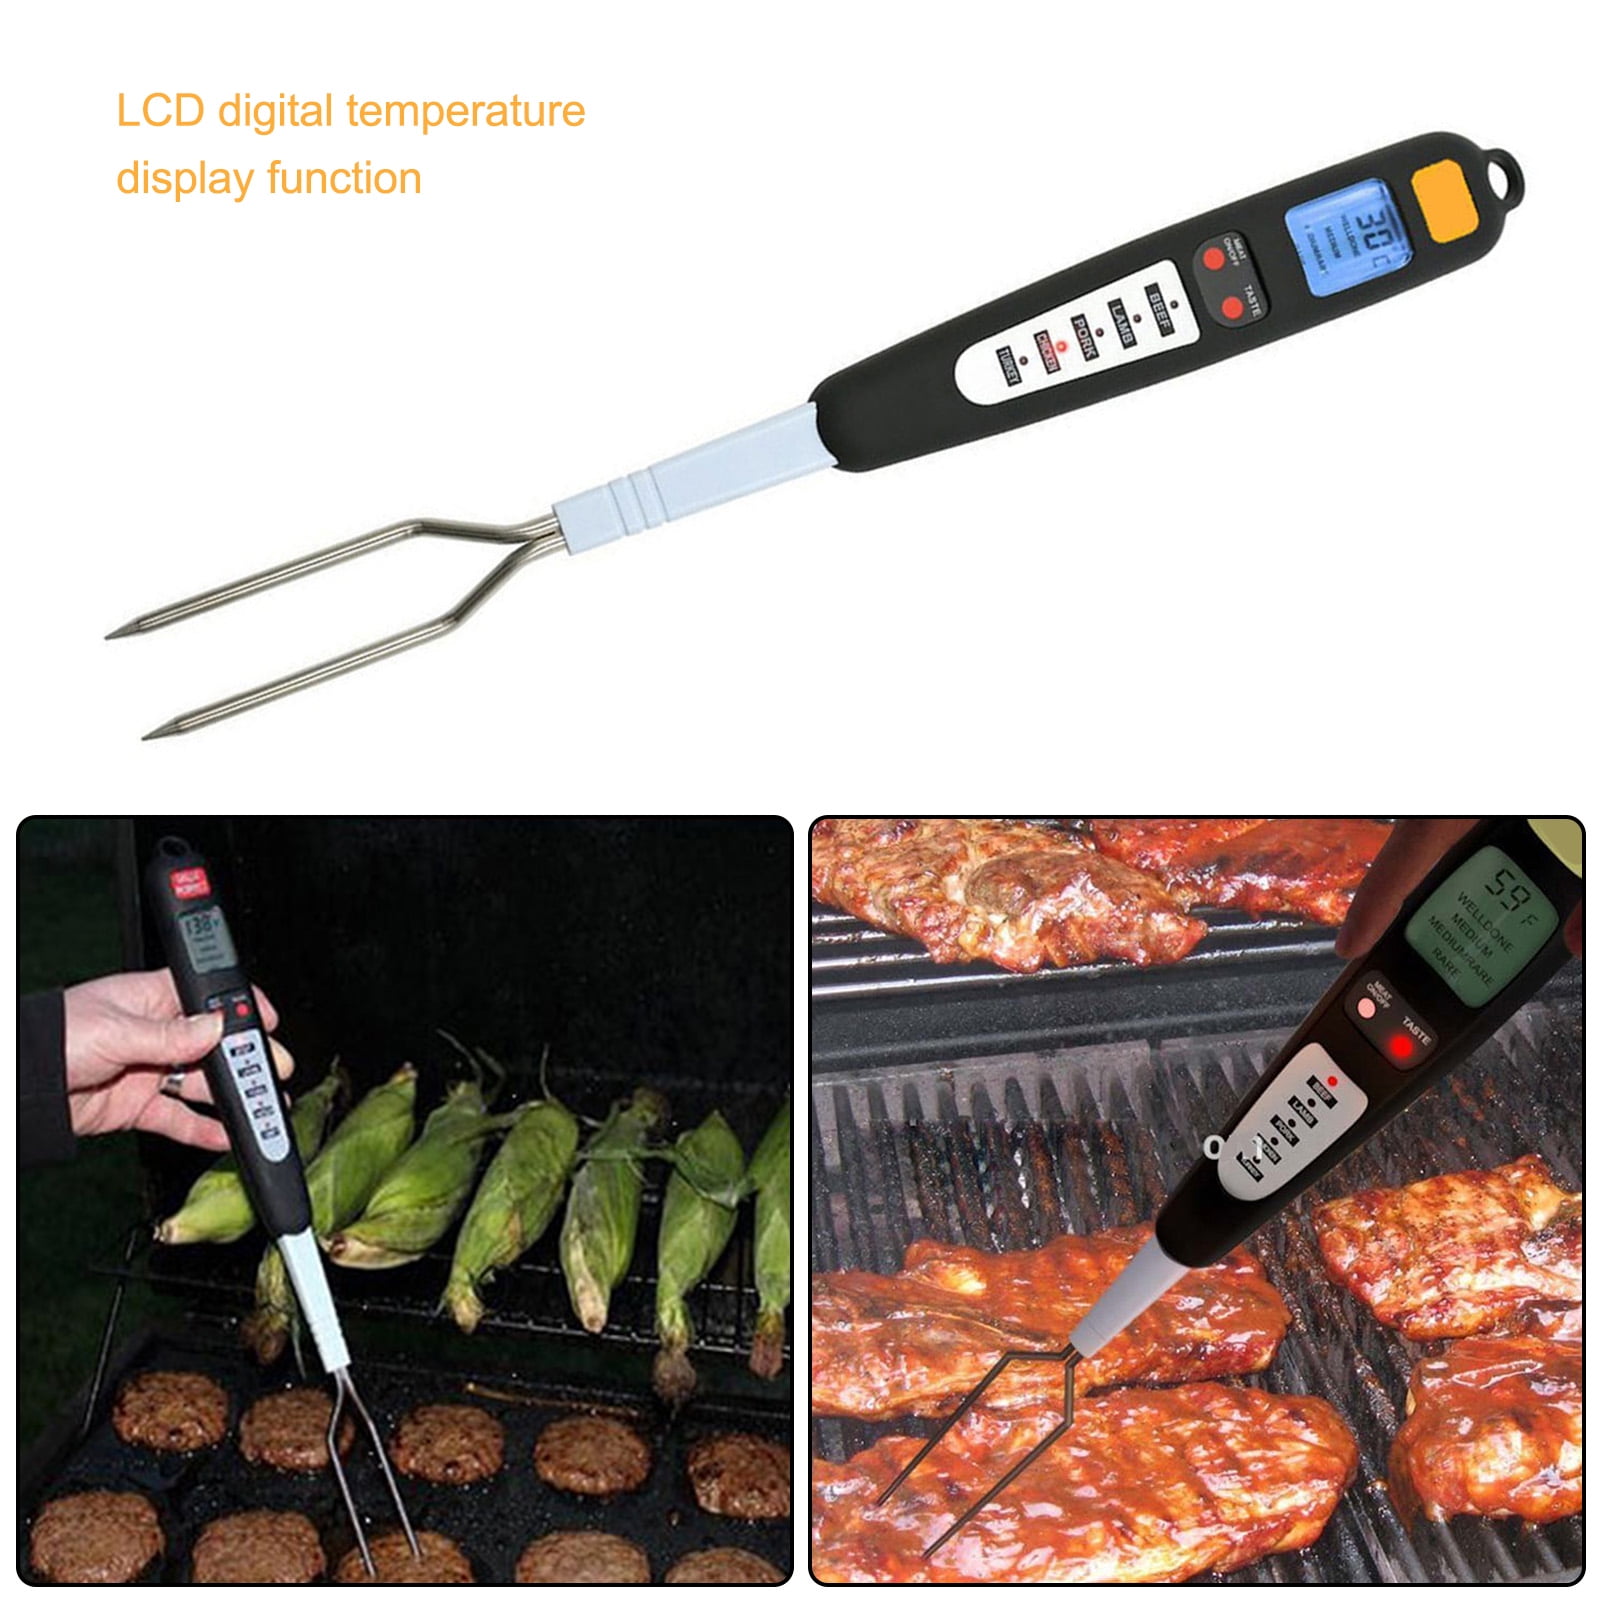 Yaoawe Temperature Meat Probe for Ninja Fg550/fg551 Smart XL 6-in-1 Indoor Grill, Replacement for Ninja Air Fry Smart Thermometer Probe, Other